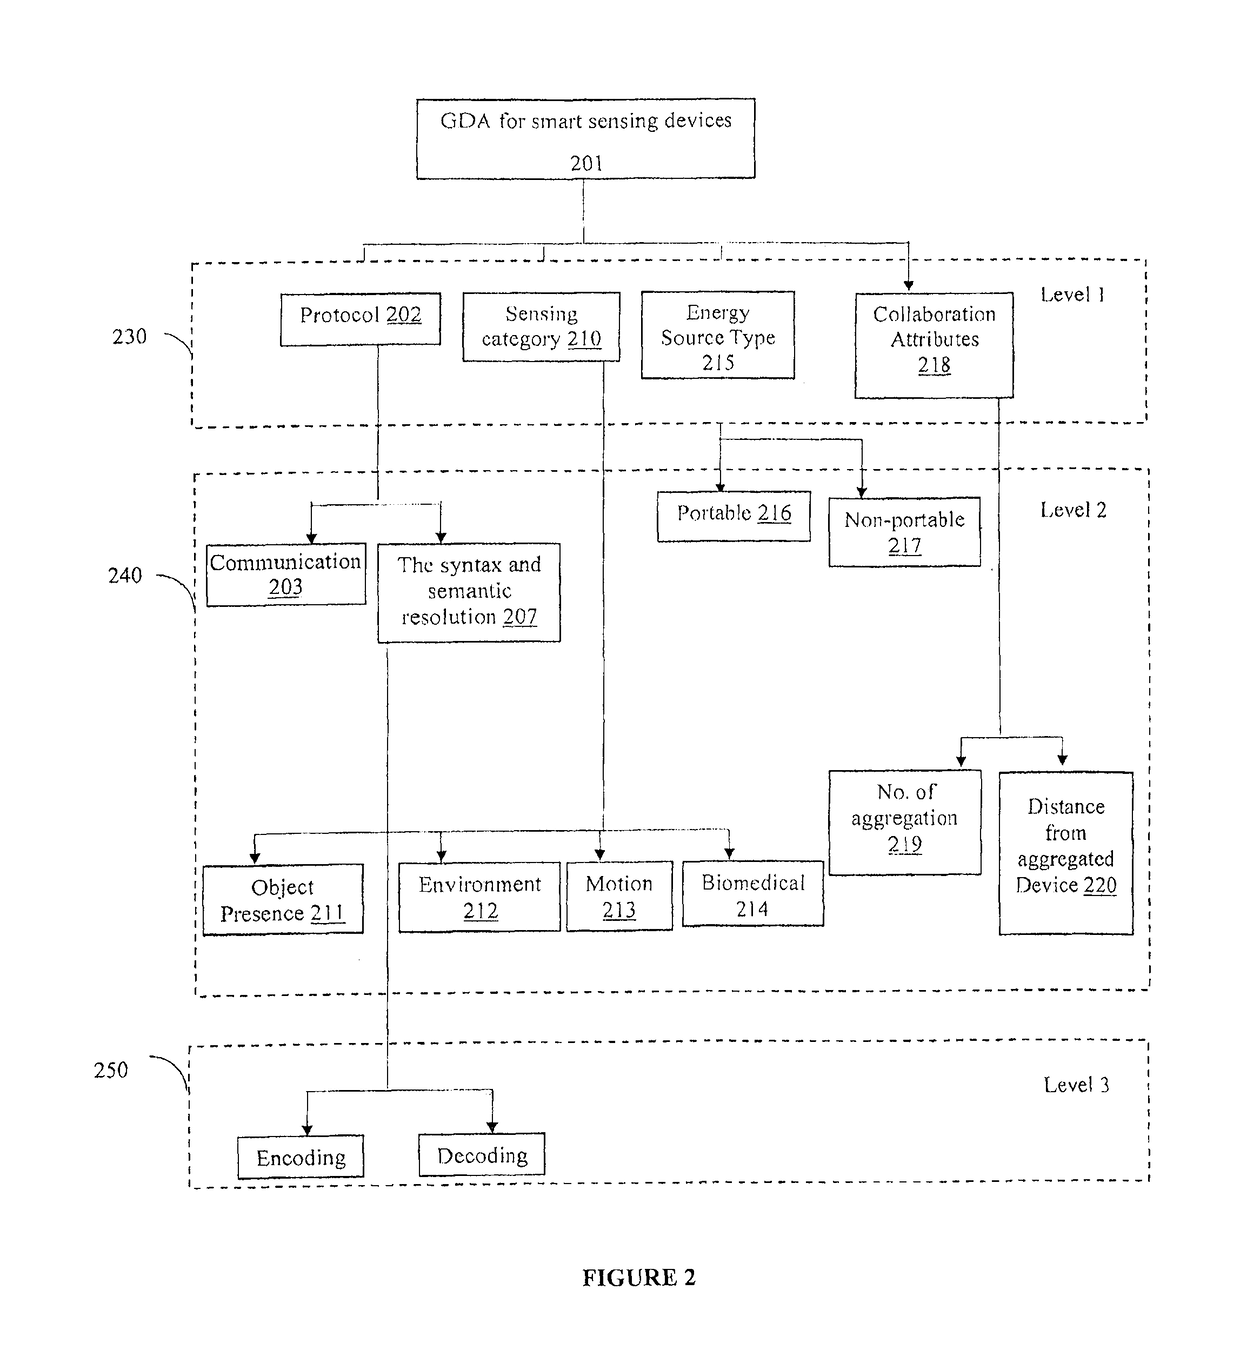 Generic device attributes for sensing devices